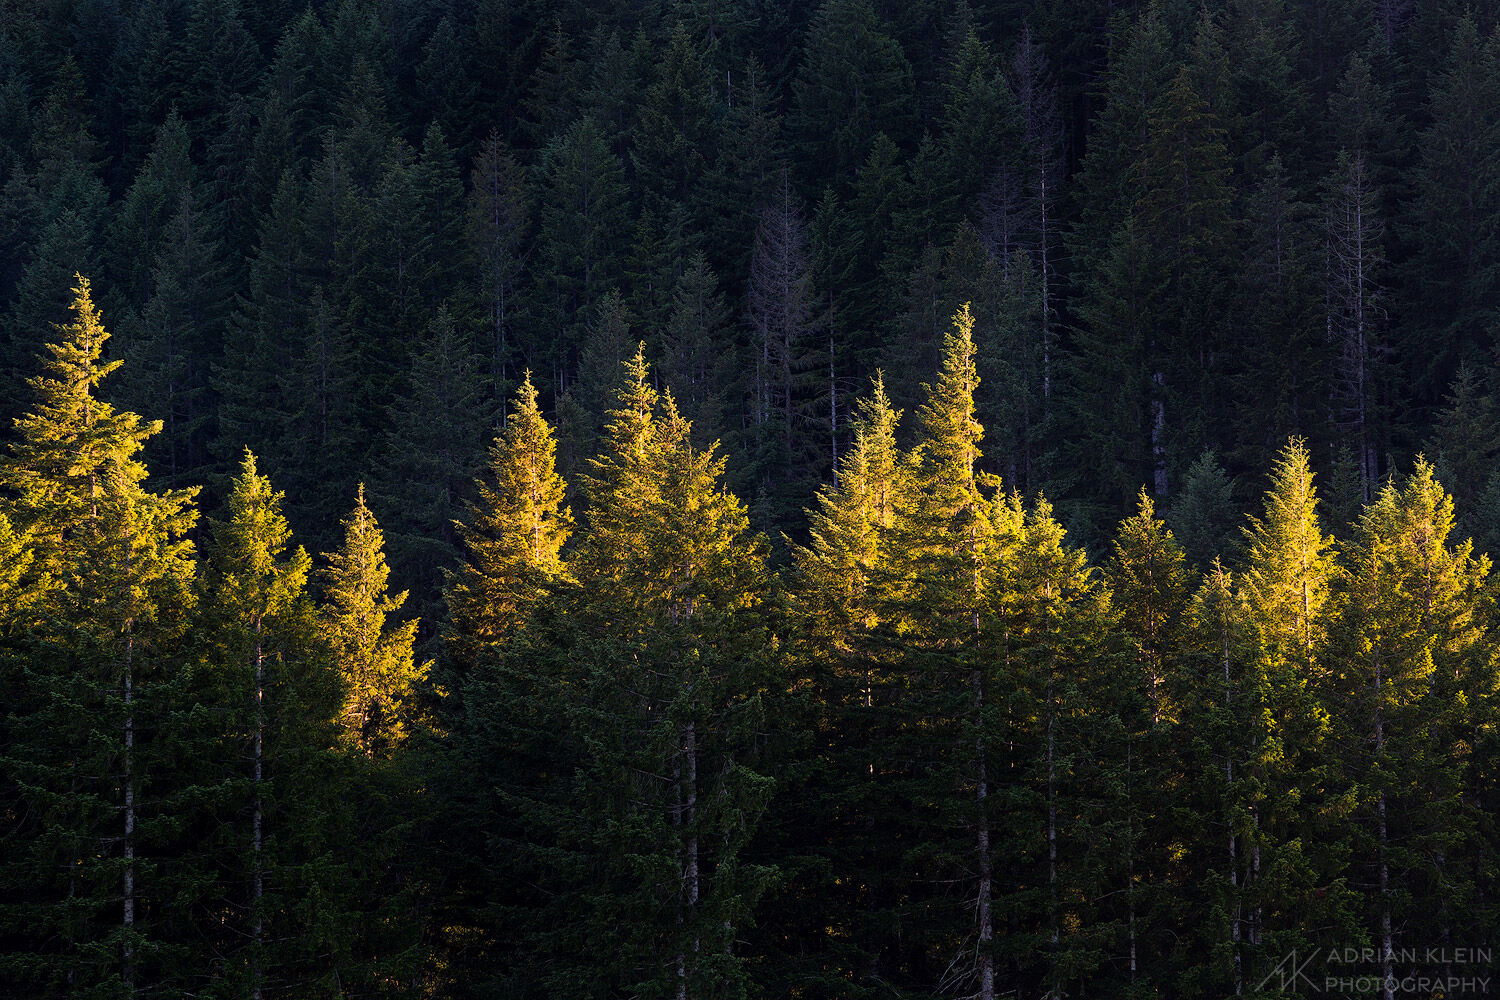 The tips of evergreen trees in Washington at sunset, standing tall for the last of the sunlight.